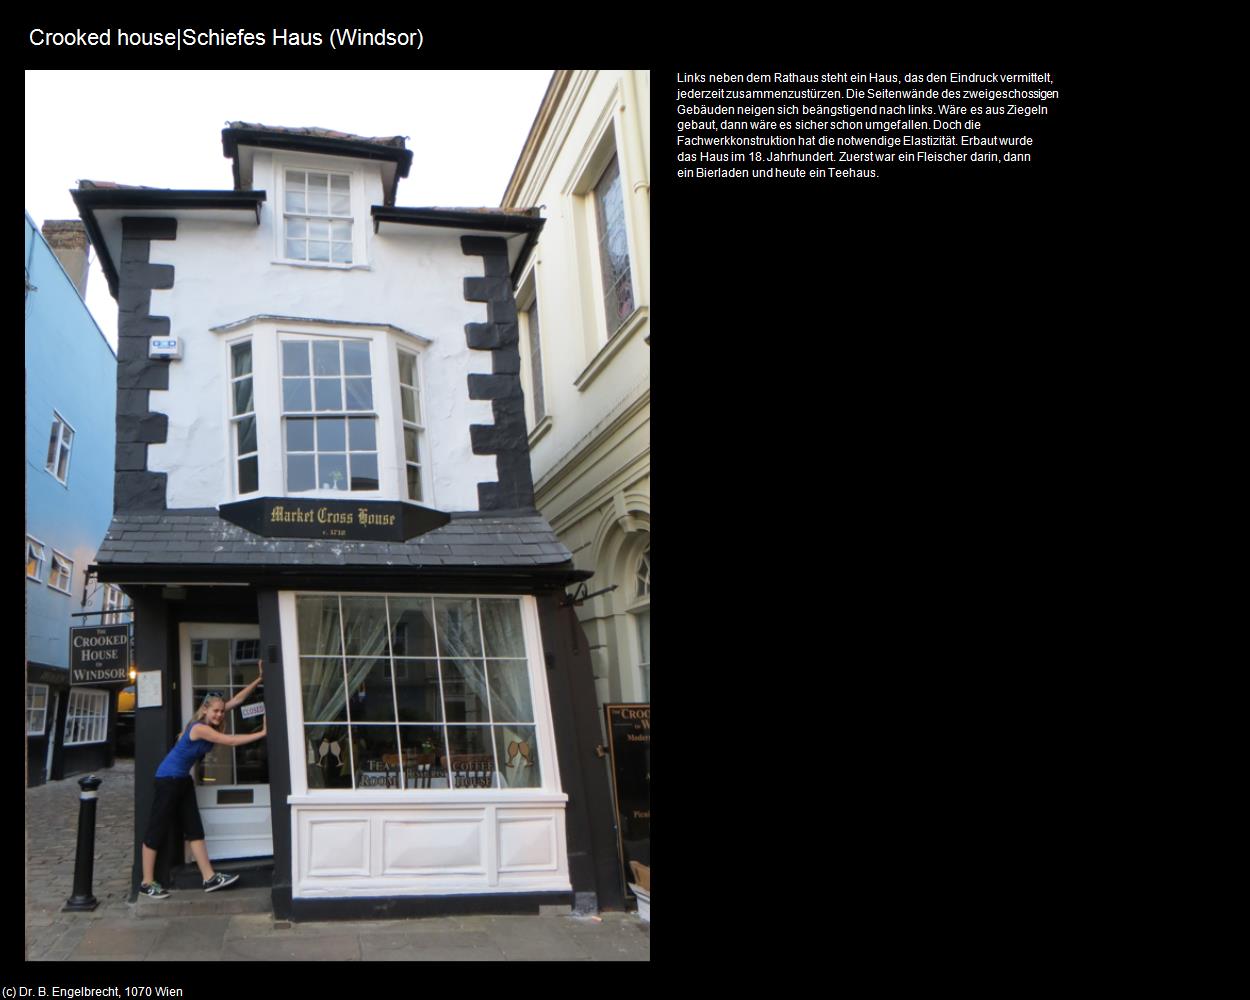 Crooked house|Schiefes Haus (Windsor, England) in Kulturatlas-ENGLAND und WALES